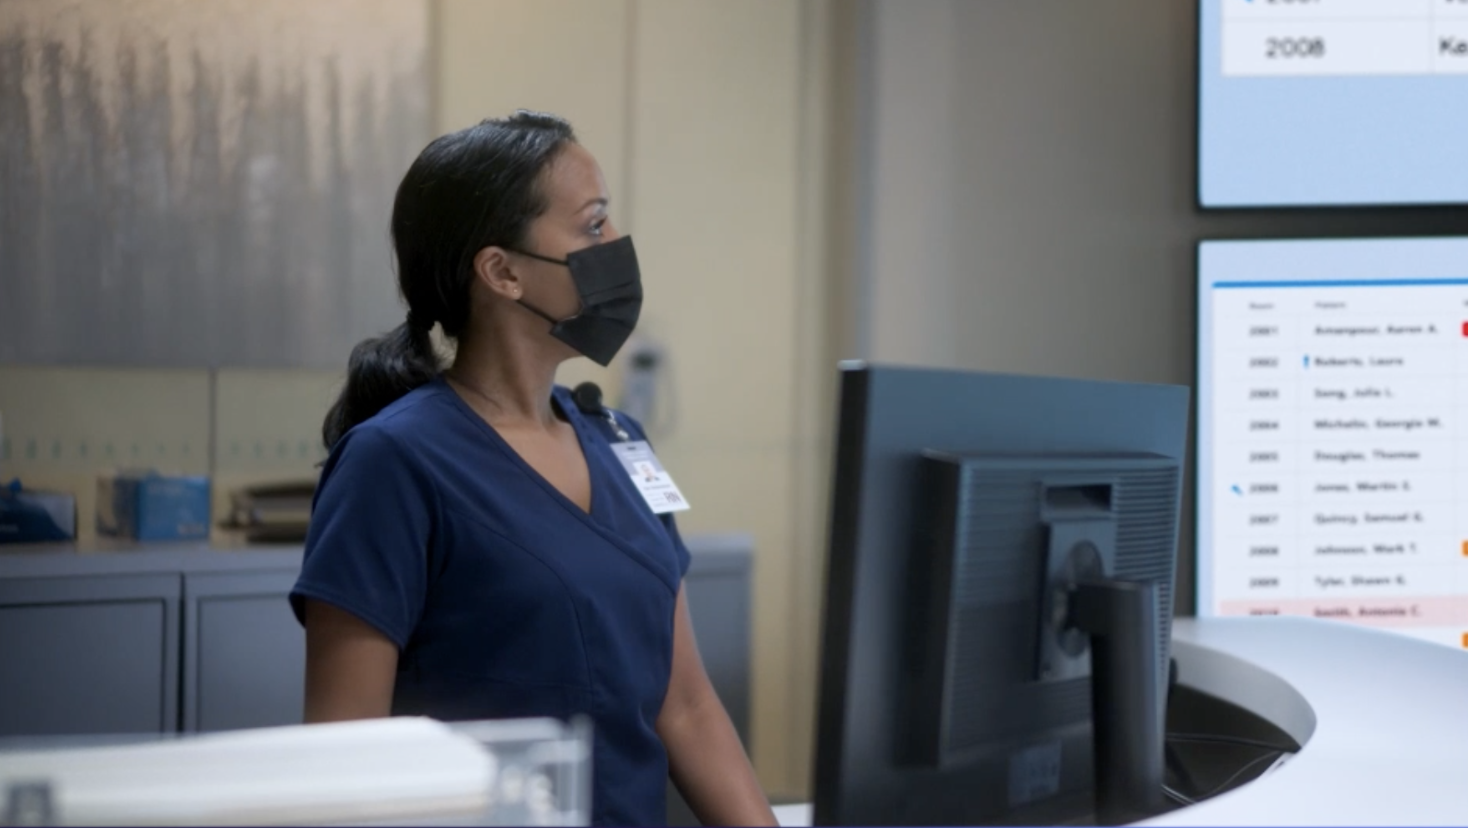 A masked healtcare worker stands at her station.